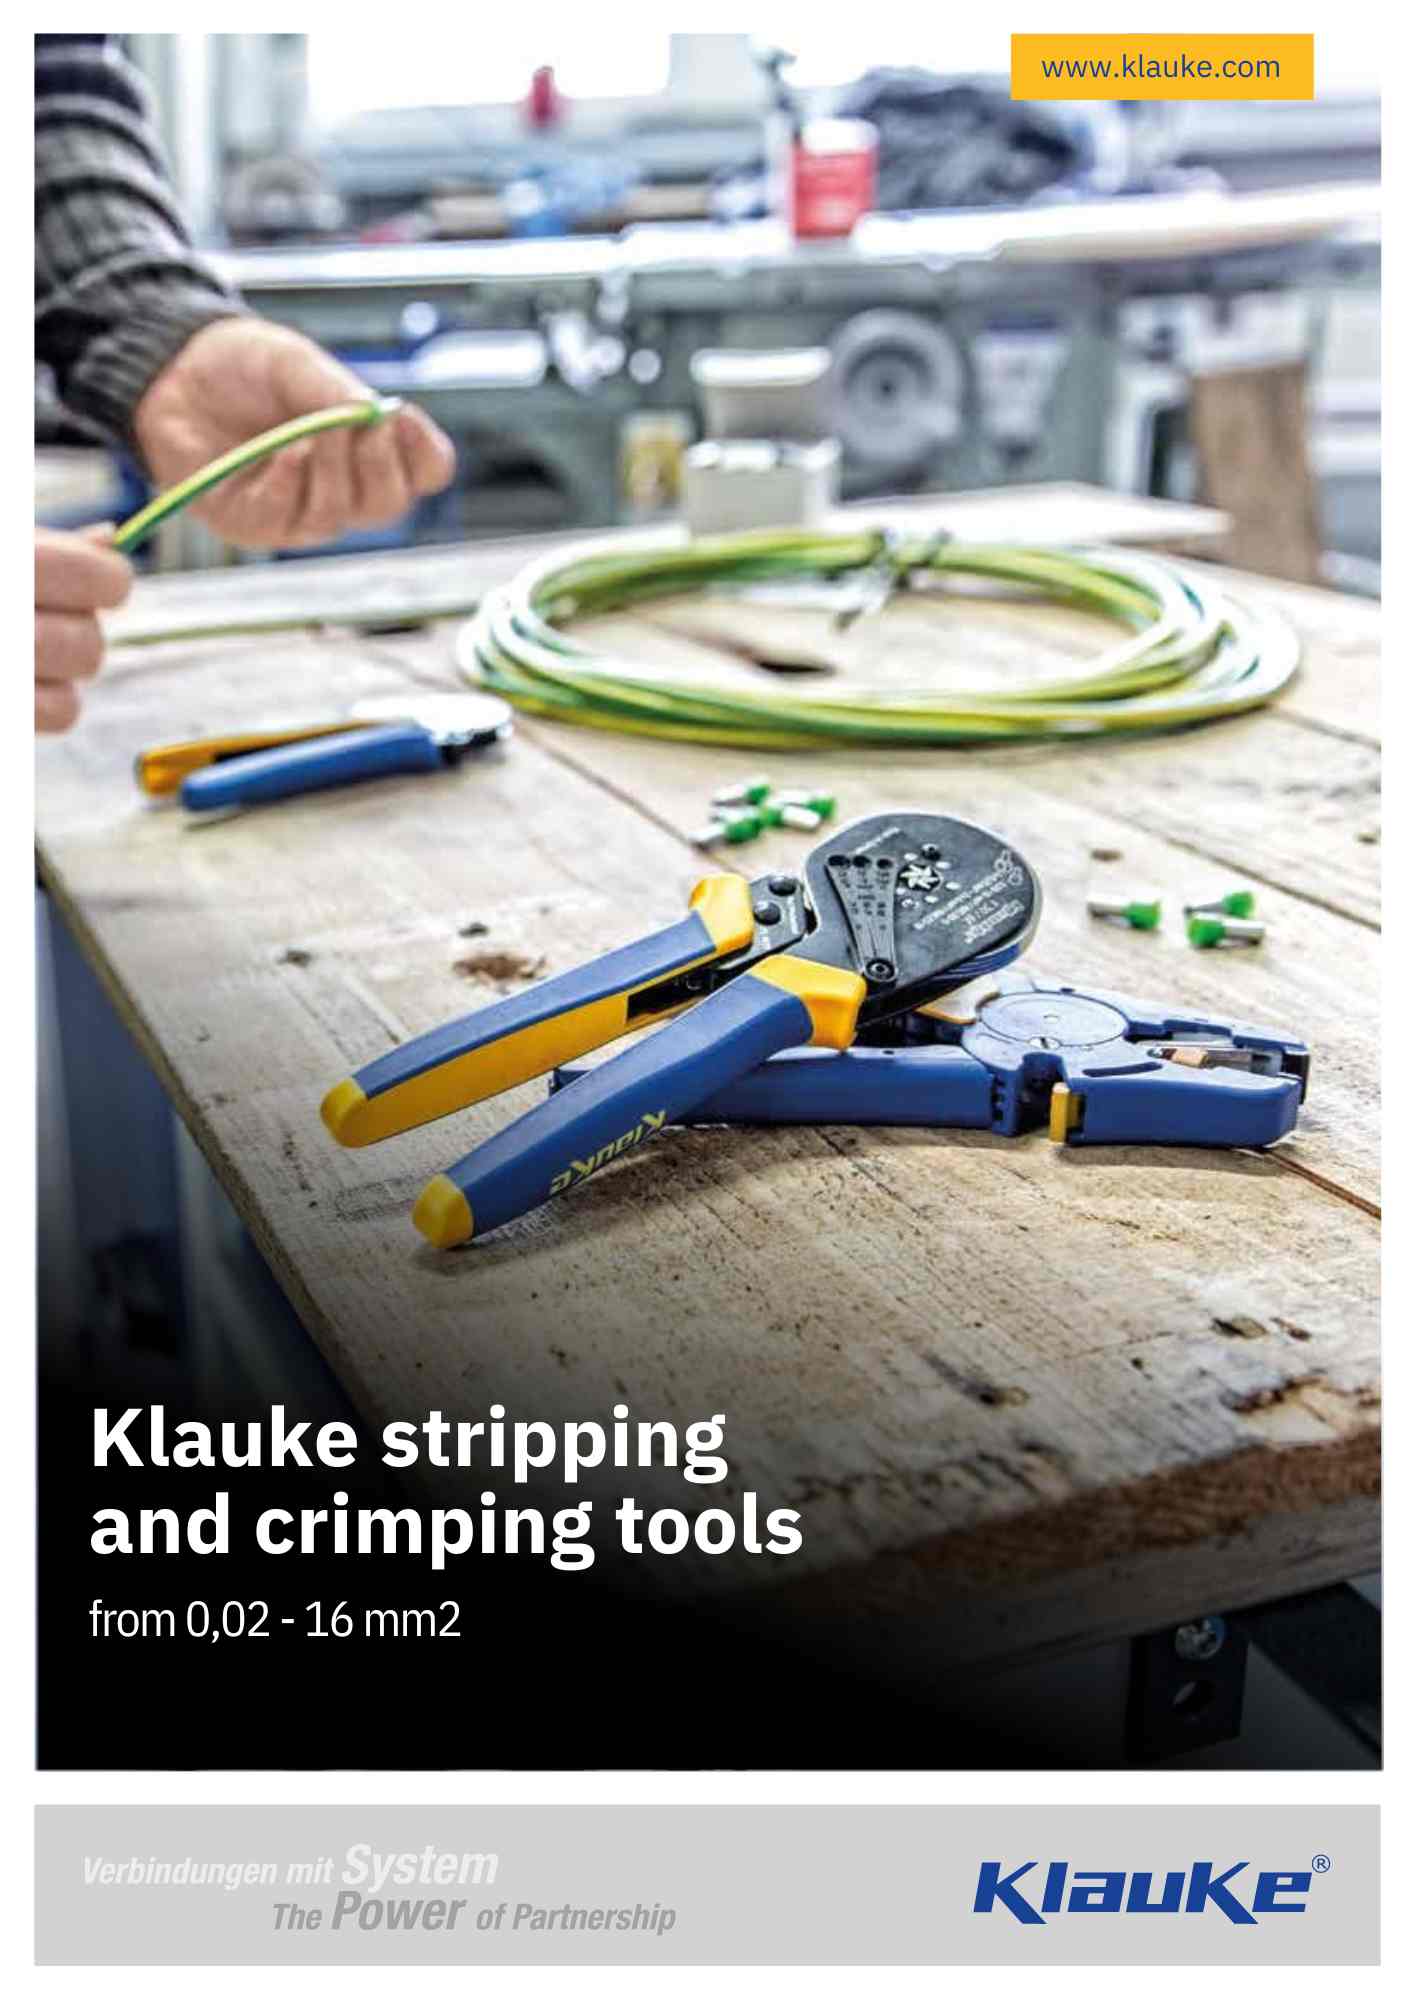 Stripping and crimping